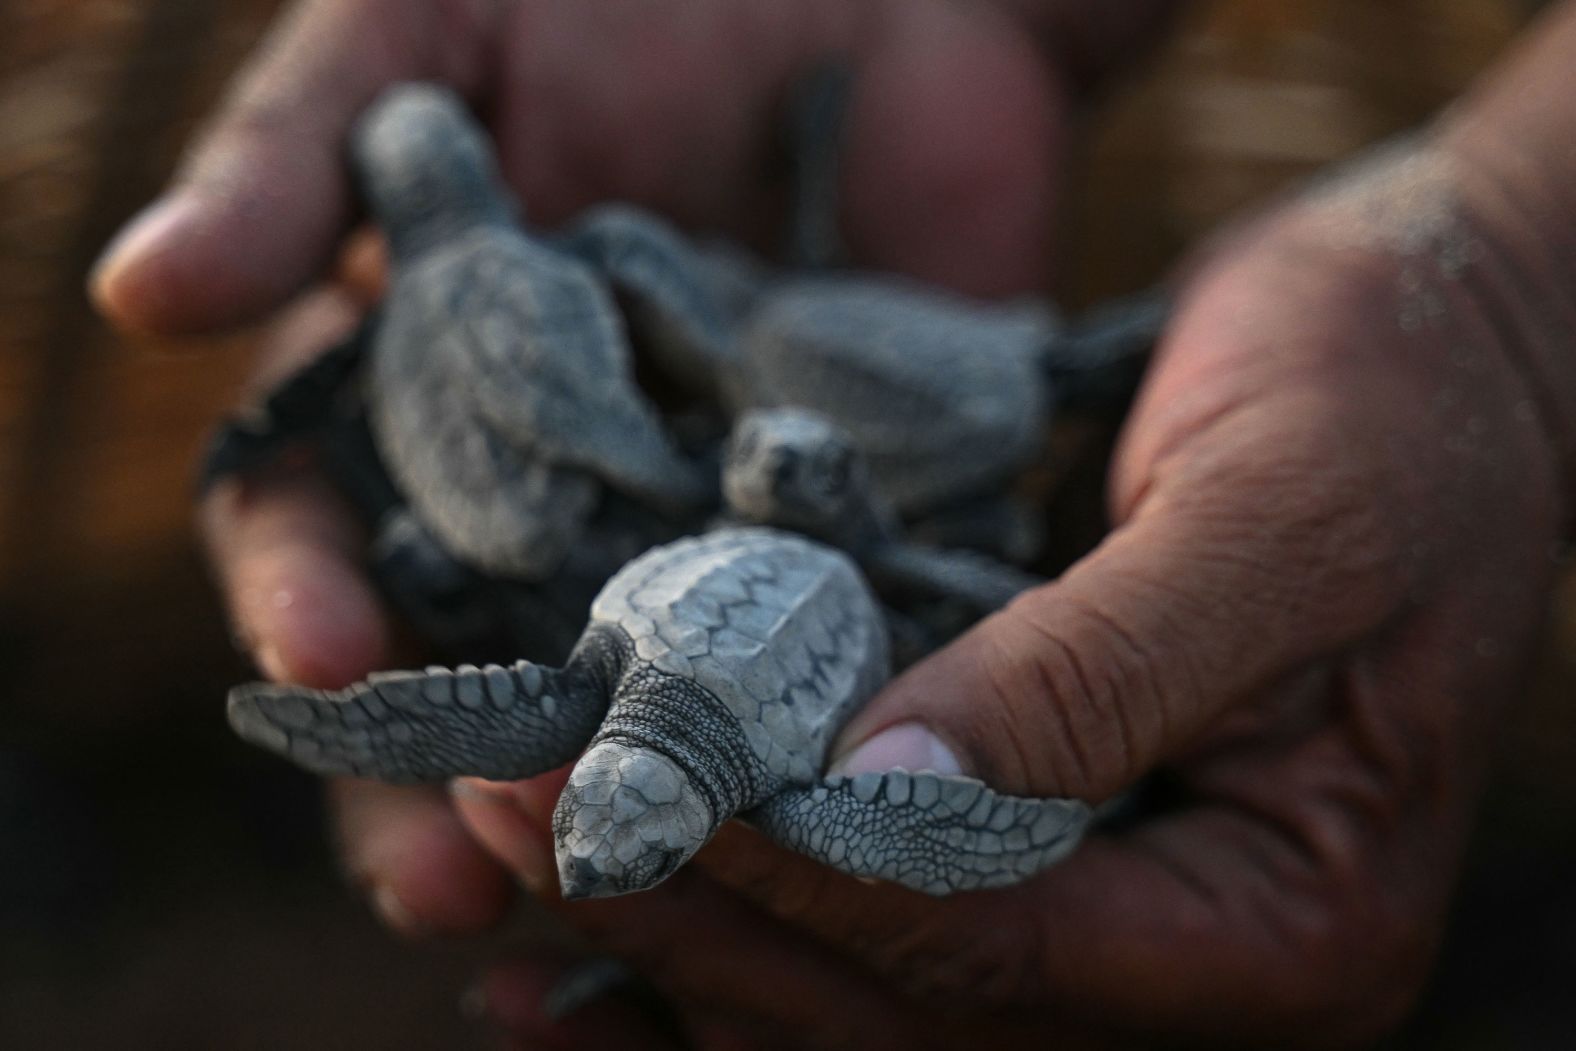 A forest department worker displays newly hatched olive ridley sea turtles in Chennai, India, on Monday, April 1.